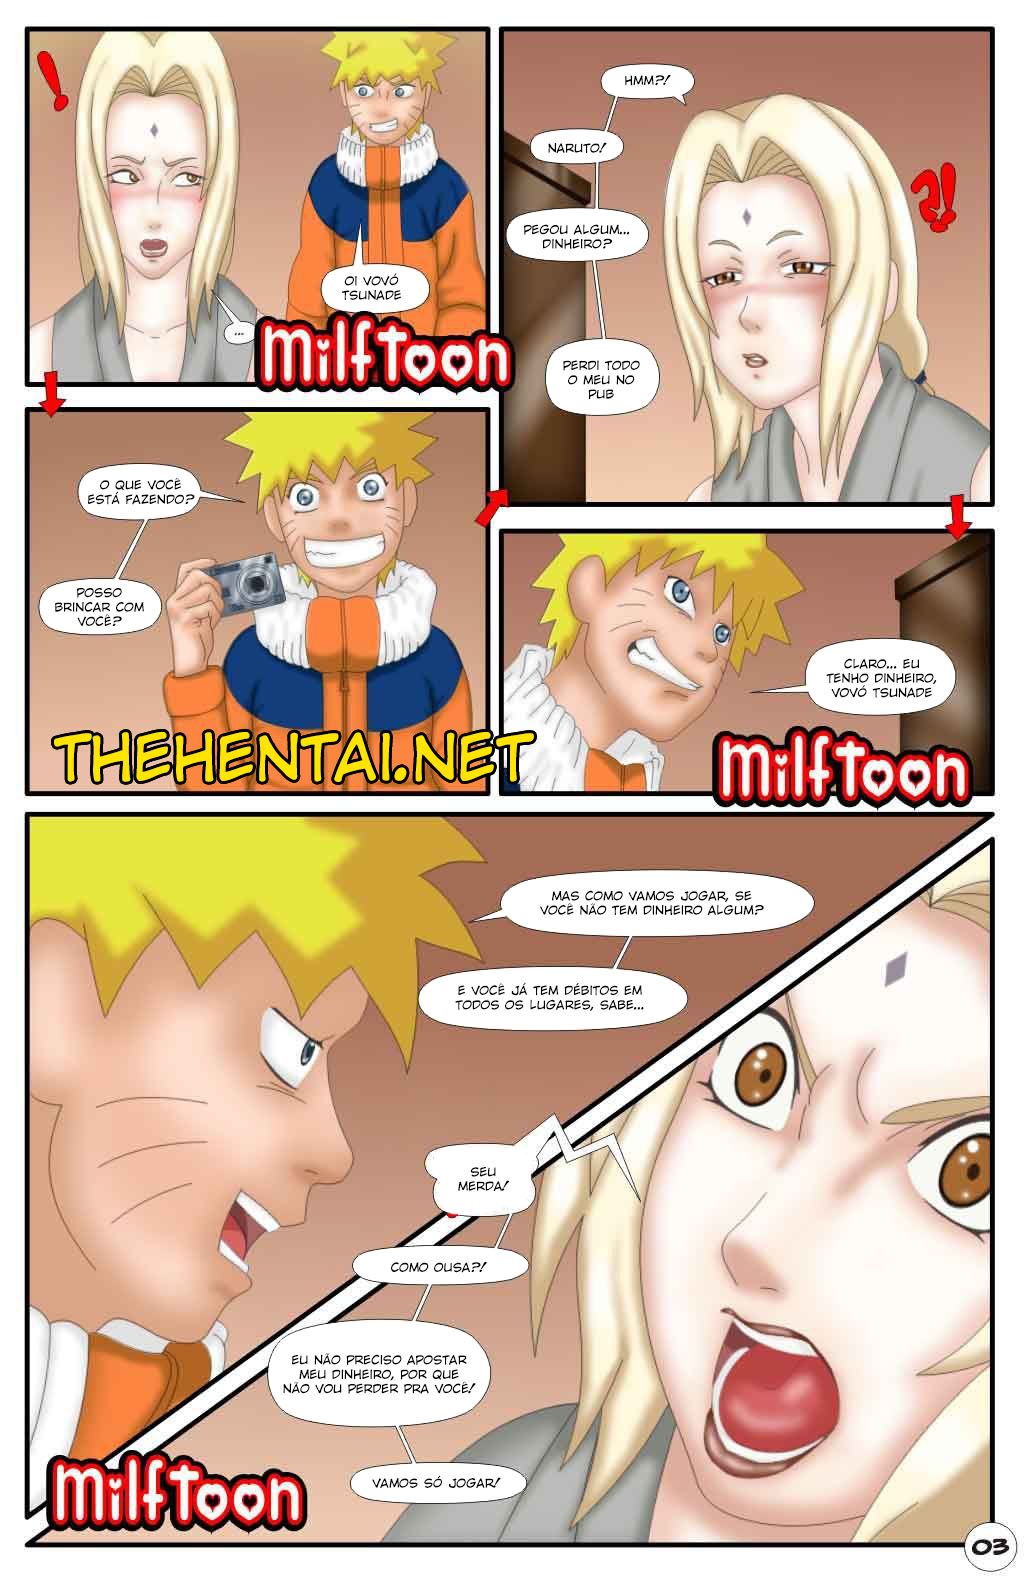 Naruto by Milftoon Hentai pt-br 03